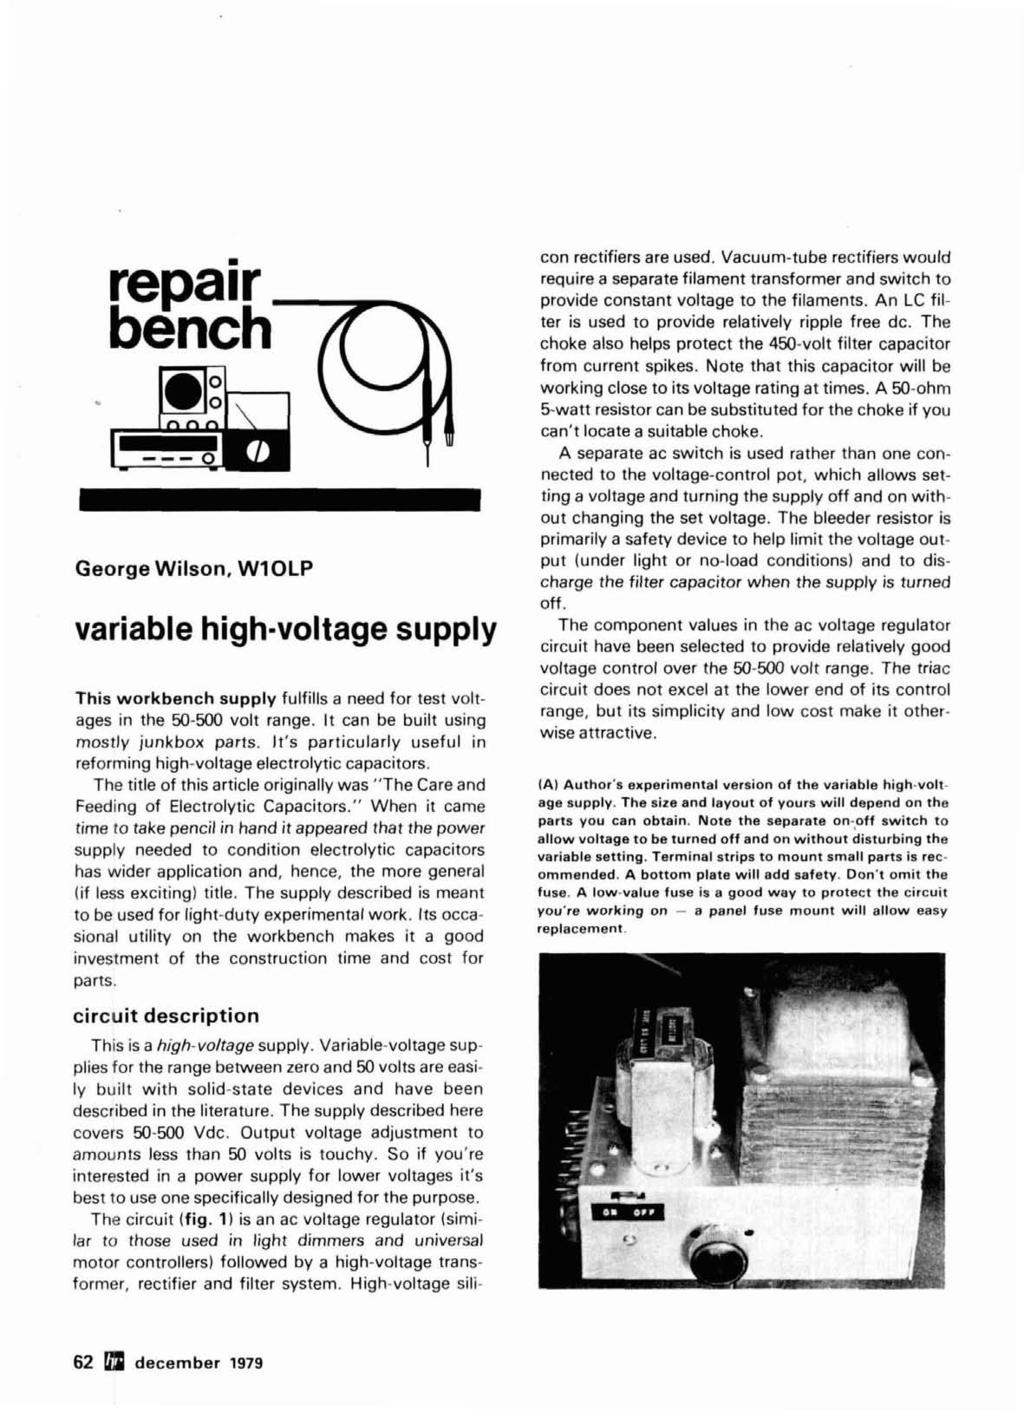 repair bench- George Wilson, W1OLP variable high-voltage supply This workbench supply fulfills a need for test voltages in the 50-500 volt range. It can be built using mostly junkbox parts.